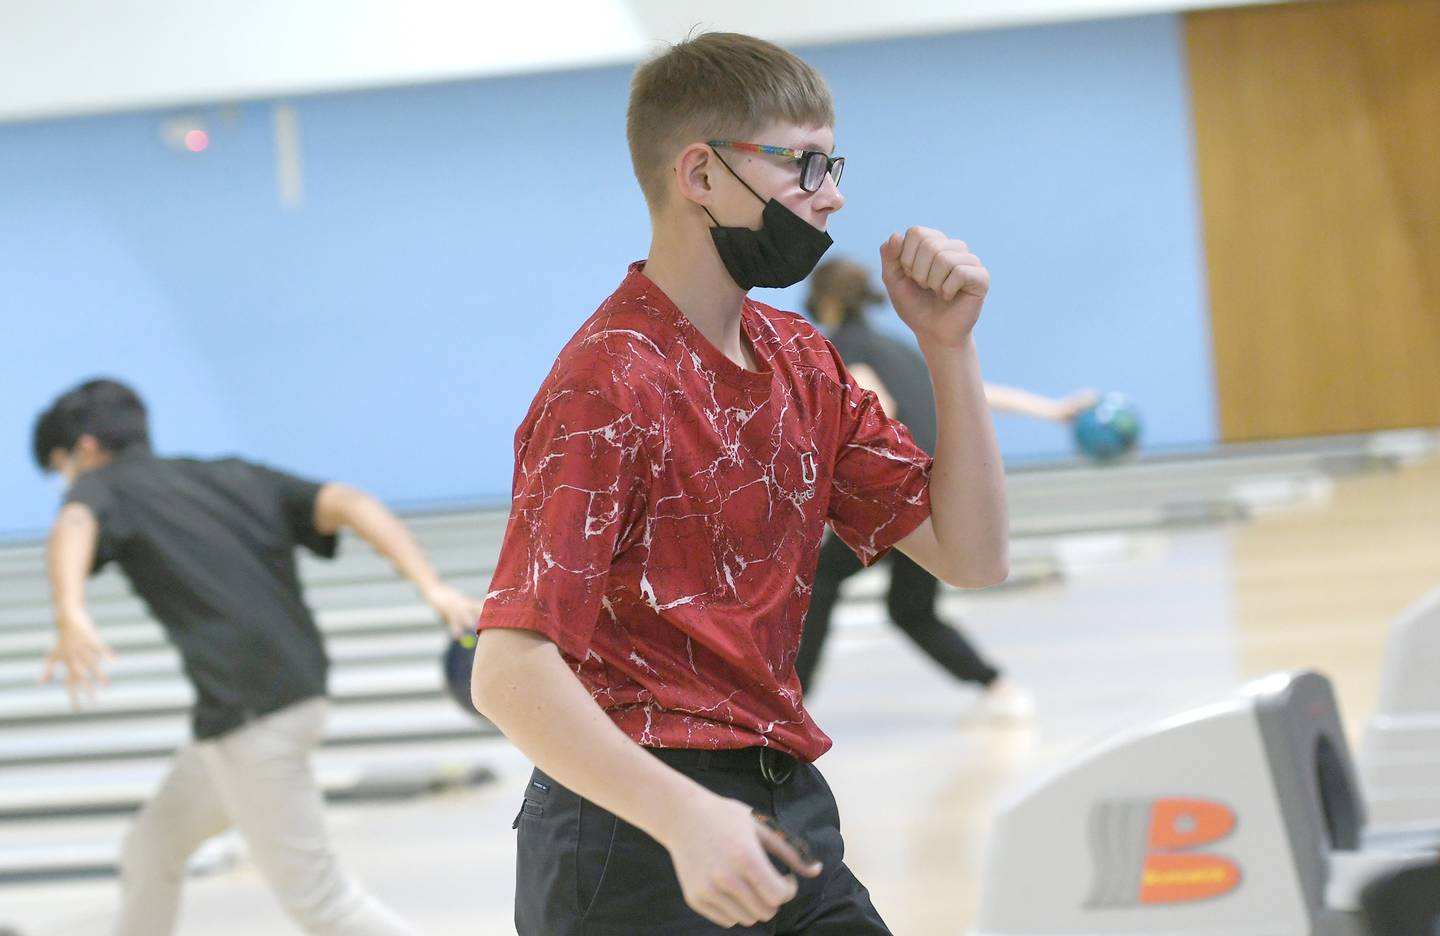 Oregon's Isaac Kaltenbrun celebrates a strike as he competes at the Hawk Claissc at Plum Hollow on Saturday.